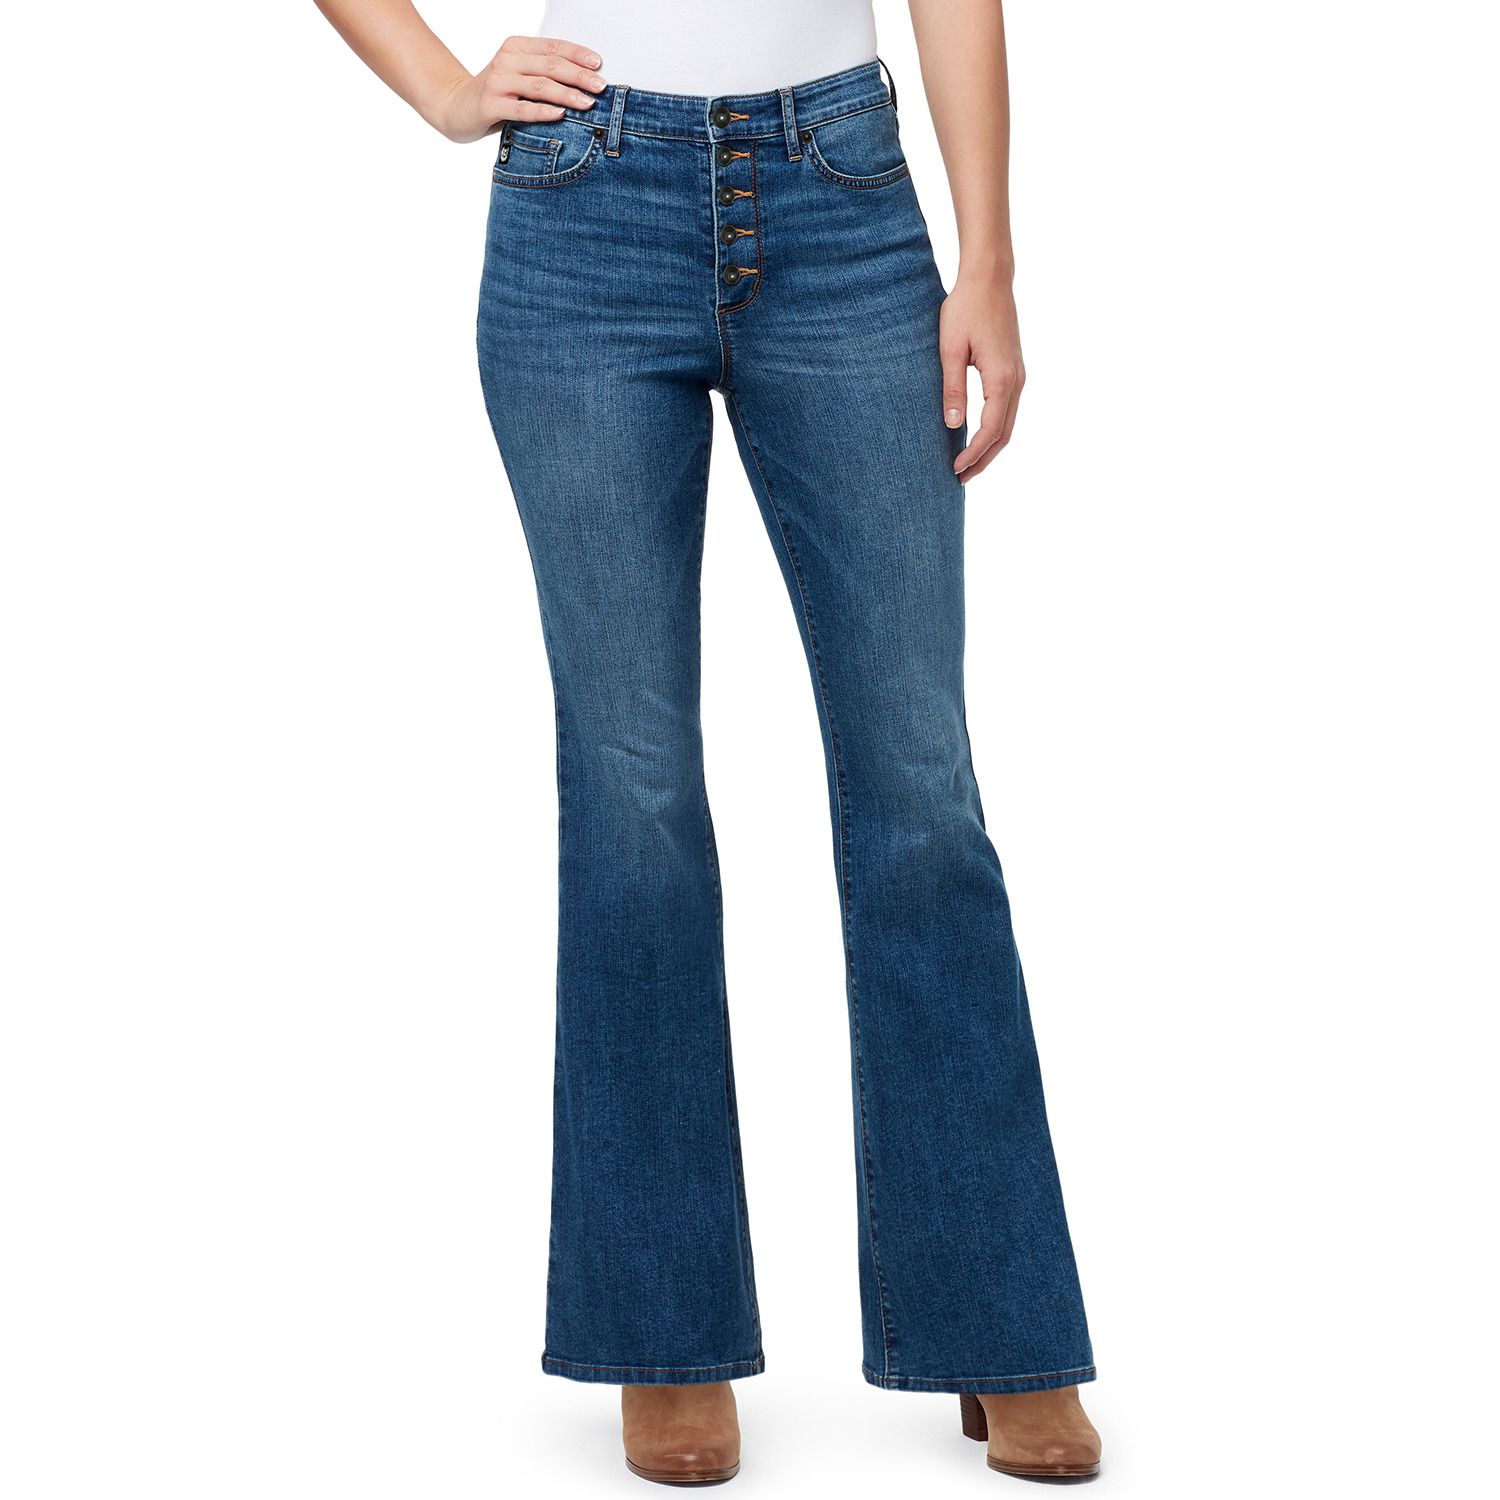 button flare jeans